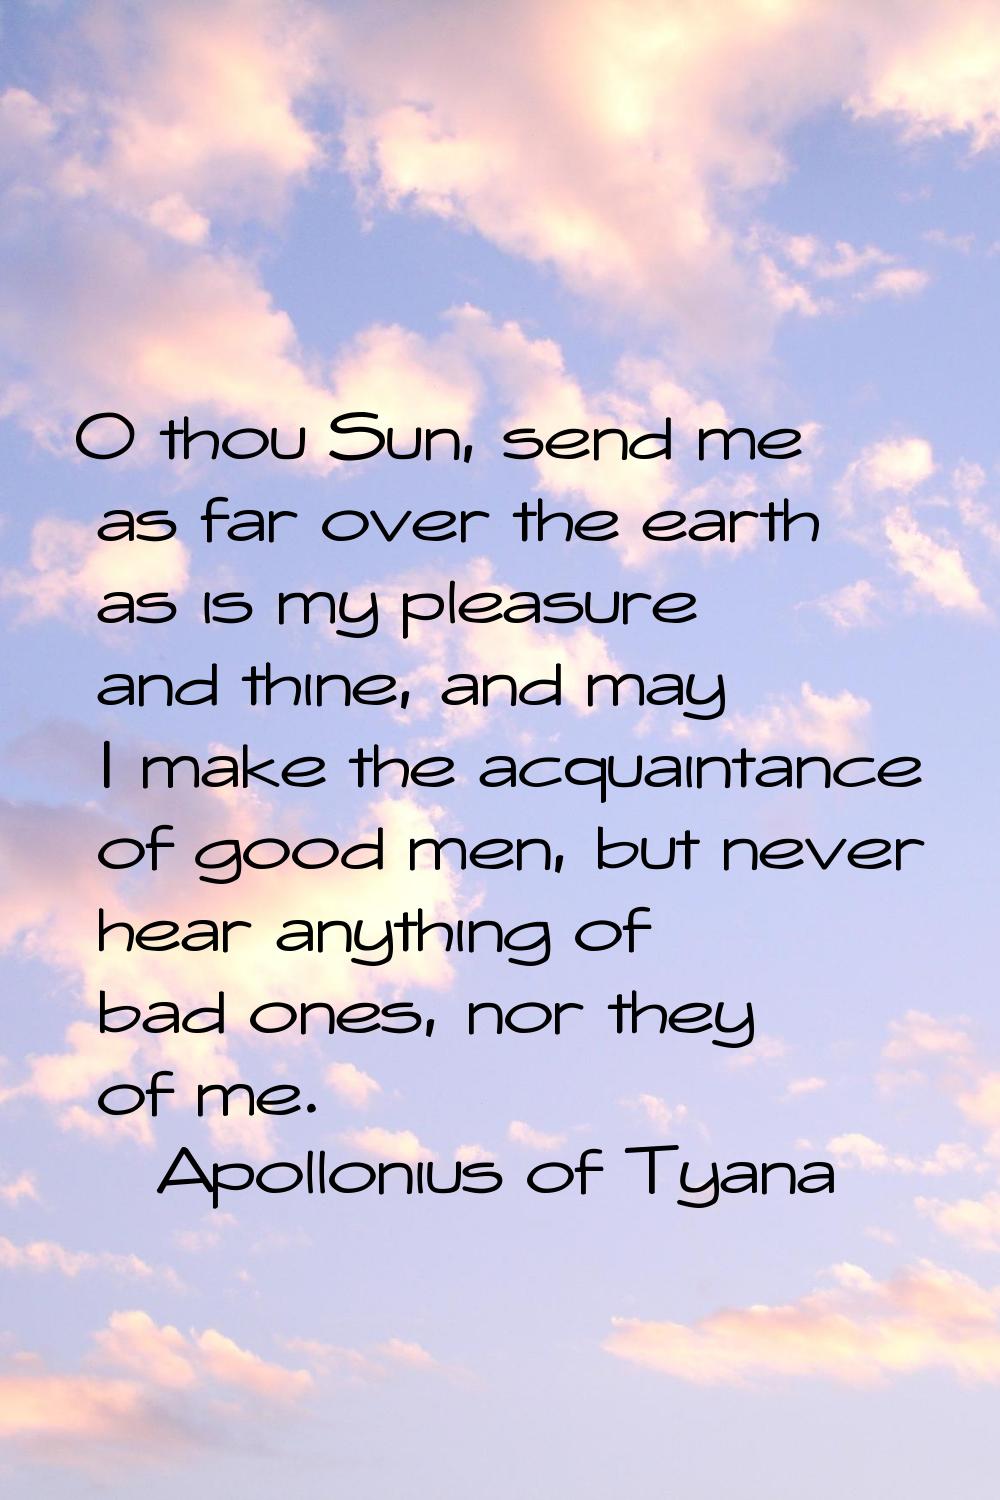 O thou Sun, send me as far over the earth as is my pleasure and thine, and may I make the acquainta